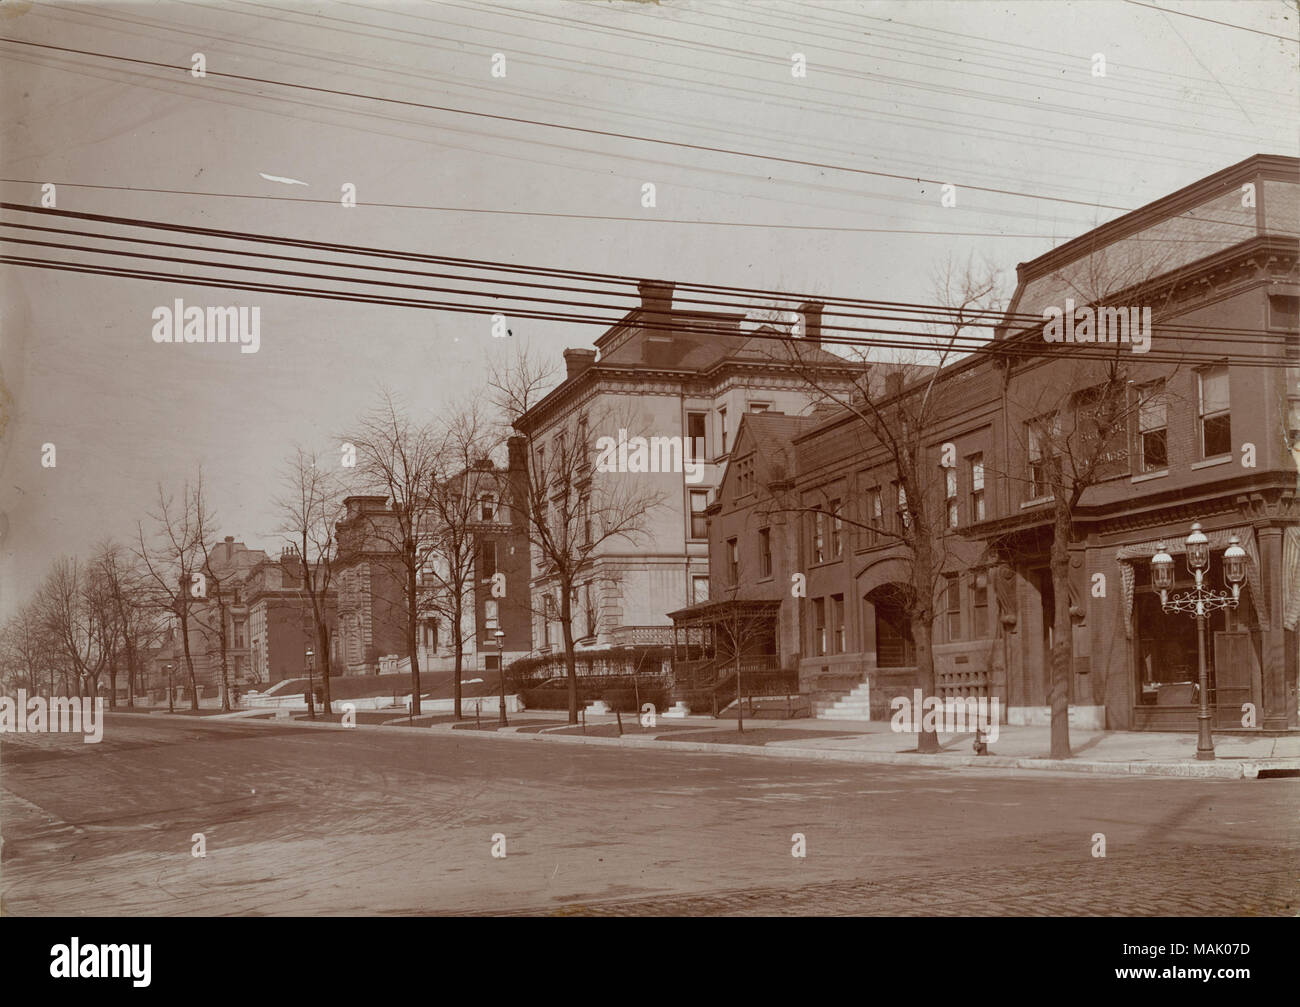 Residences at the northwest corner of Grand Avenue and Lindell Boulevard in 1910. The Berlitz School of Languages is at the northwest corner of the intersection. The first Berlitz School of Languages was opened in 1878 by Professor Maximilian. D. Berlitz. It was touted as the simplest and most efficient method for learning language, employing a total emersion method within its walls. By 1947 it is estimated that the school had 25,000 students a year and grossed $4,000,000 in revenue. Title: Northwest corner of Grand Avenue and Lindell Boulevard.  . 1910. Oscar C. Kuehn Stock Photo